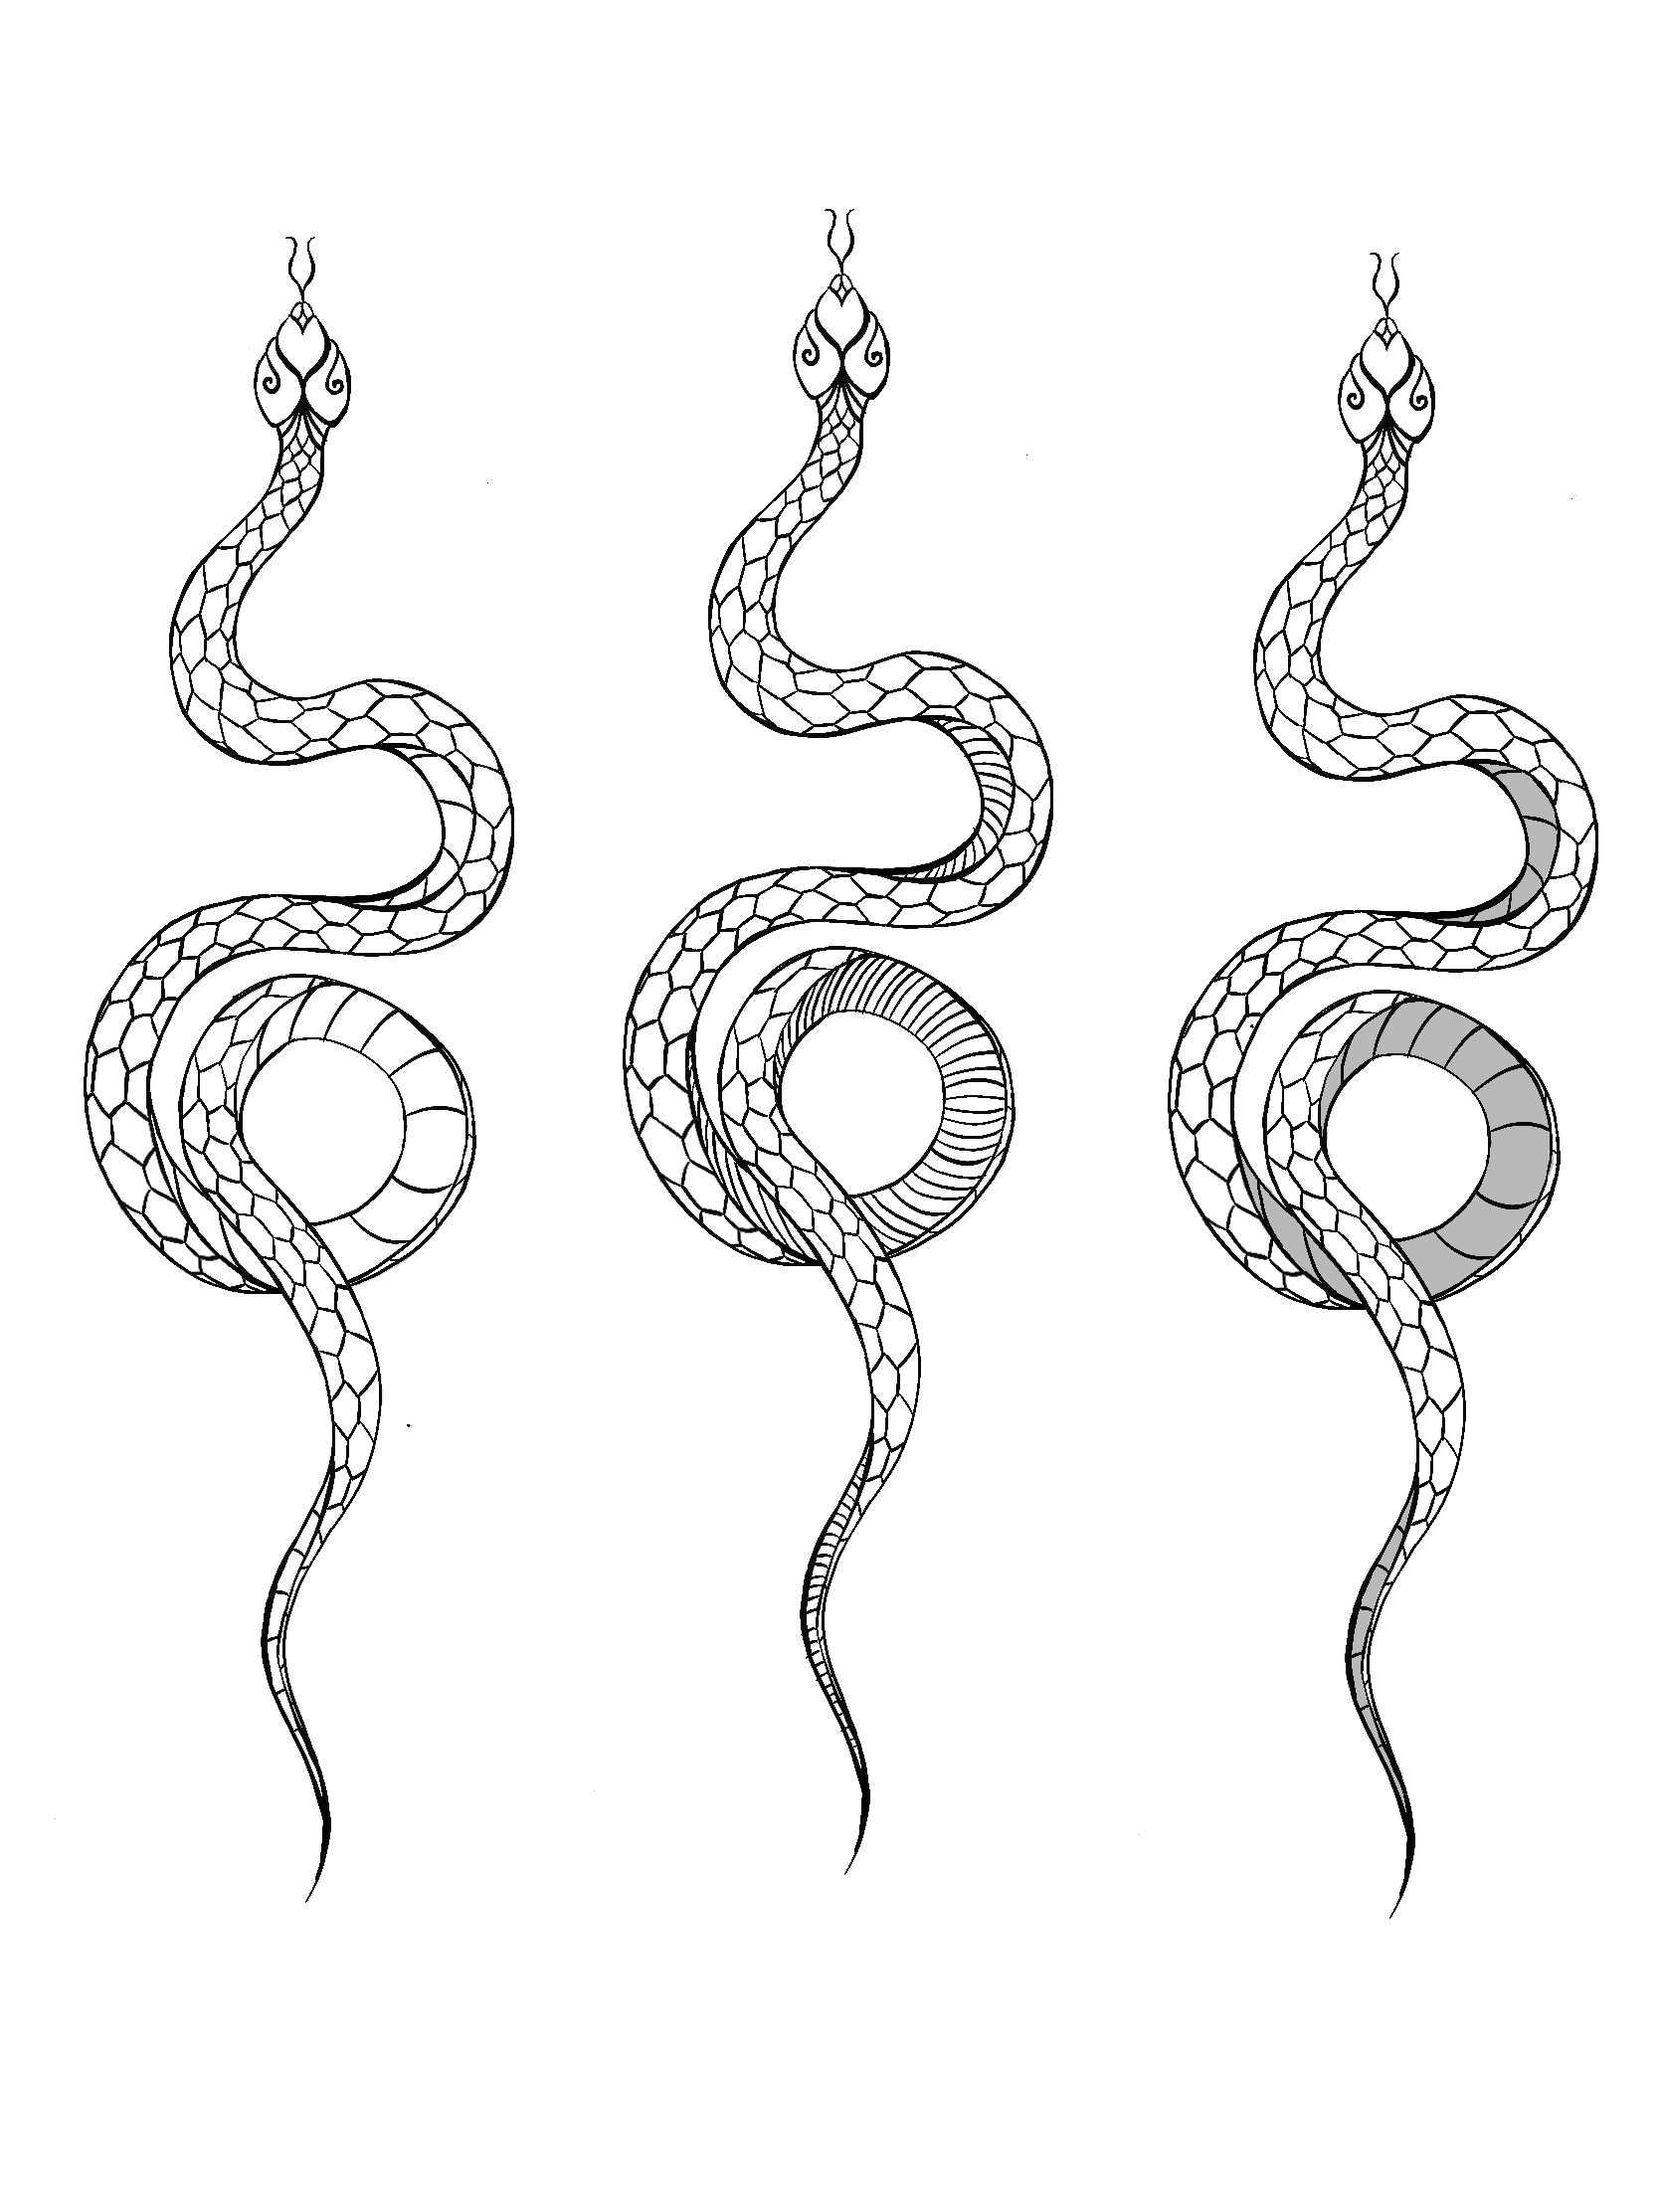 Snake Tattoo Designs (commissioned)